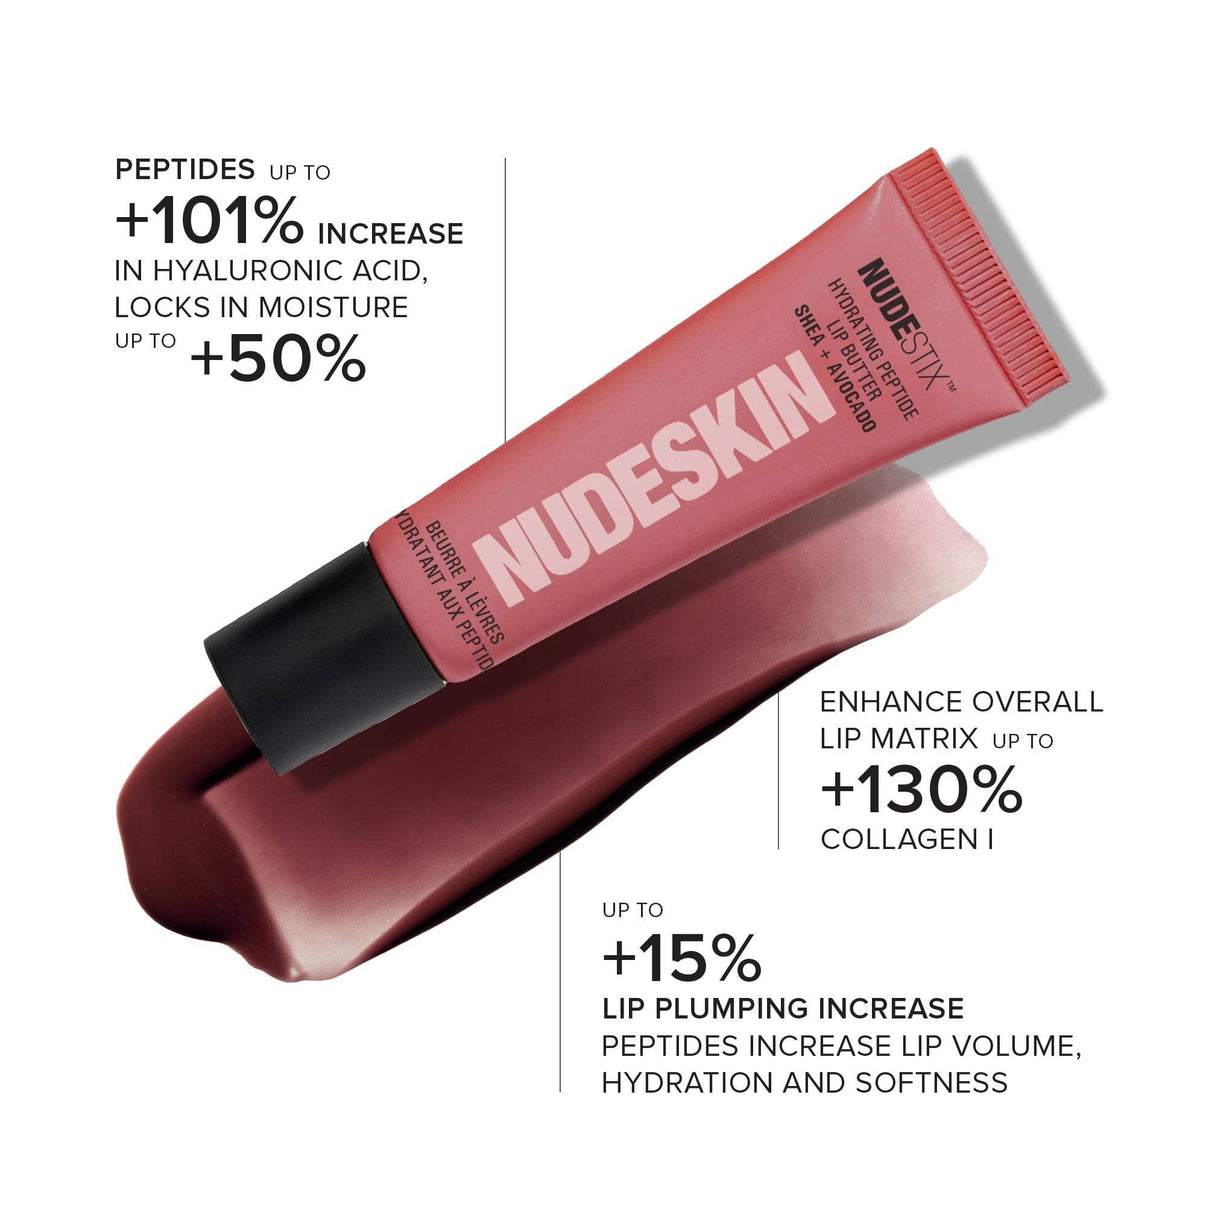 nudeskin hydrating lip butter benefits and application usage